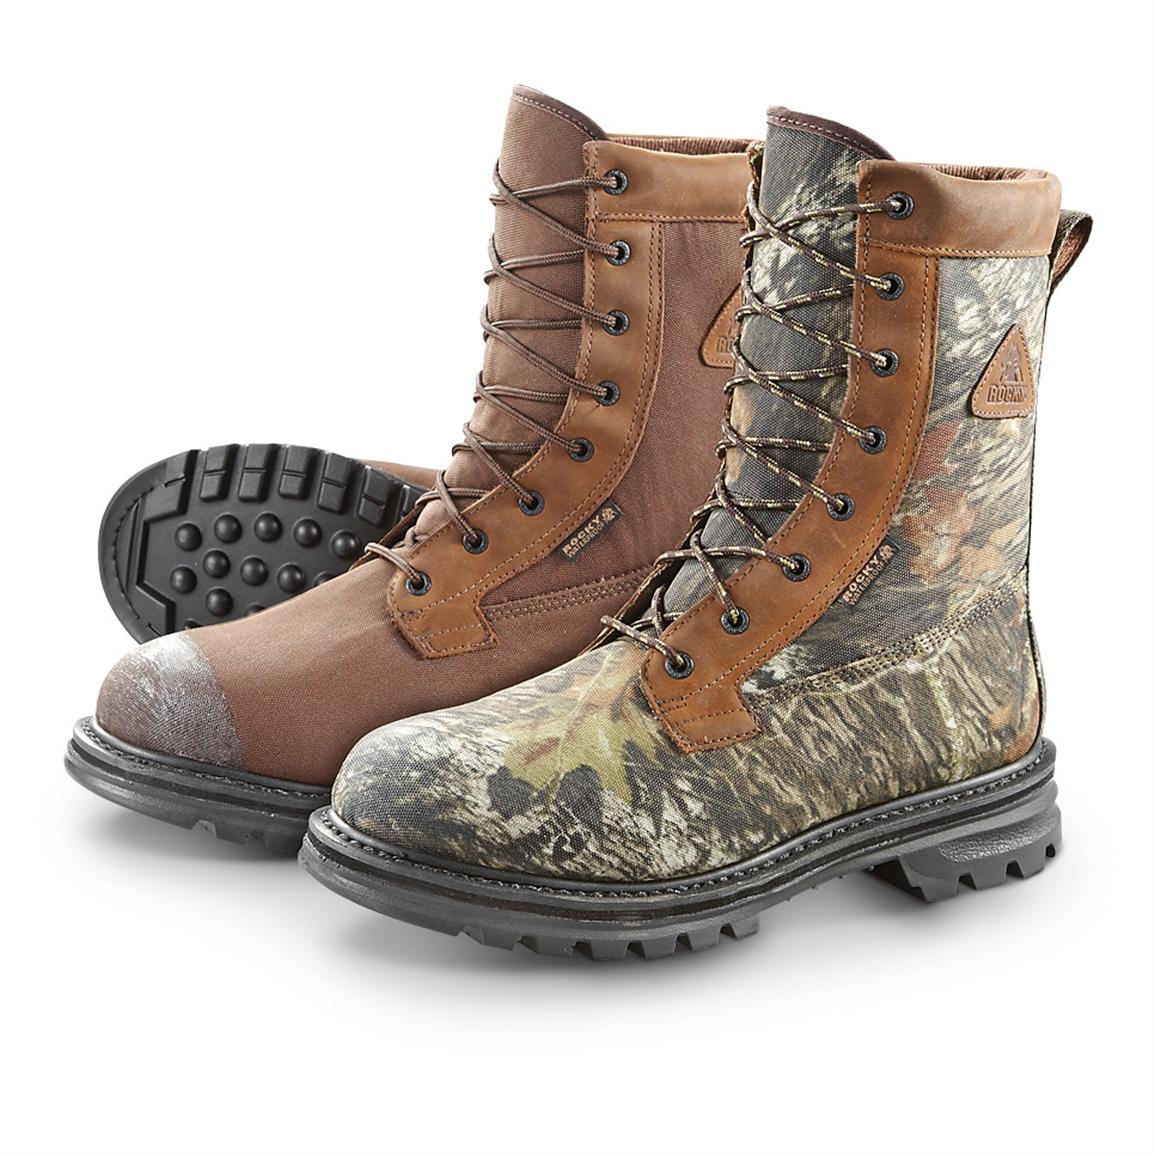 Buy > rockies boots near me > in stock